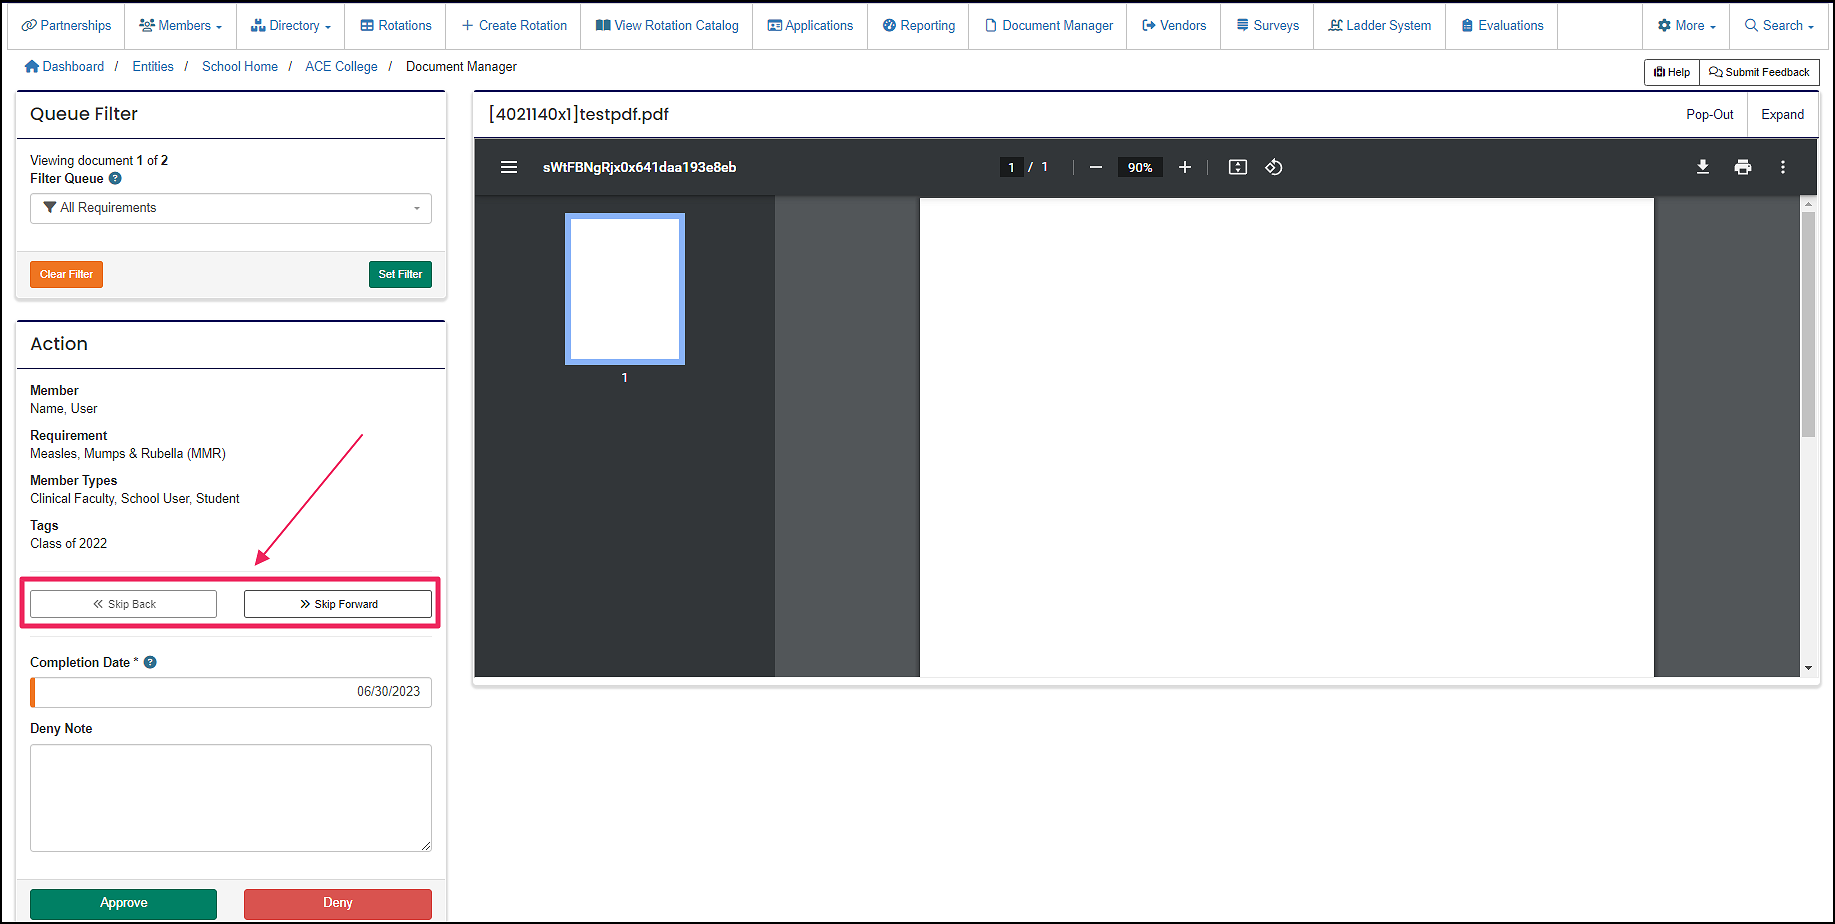 Image shows skip forward and skip back buttons within document queue.